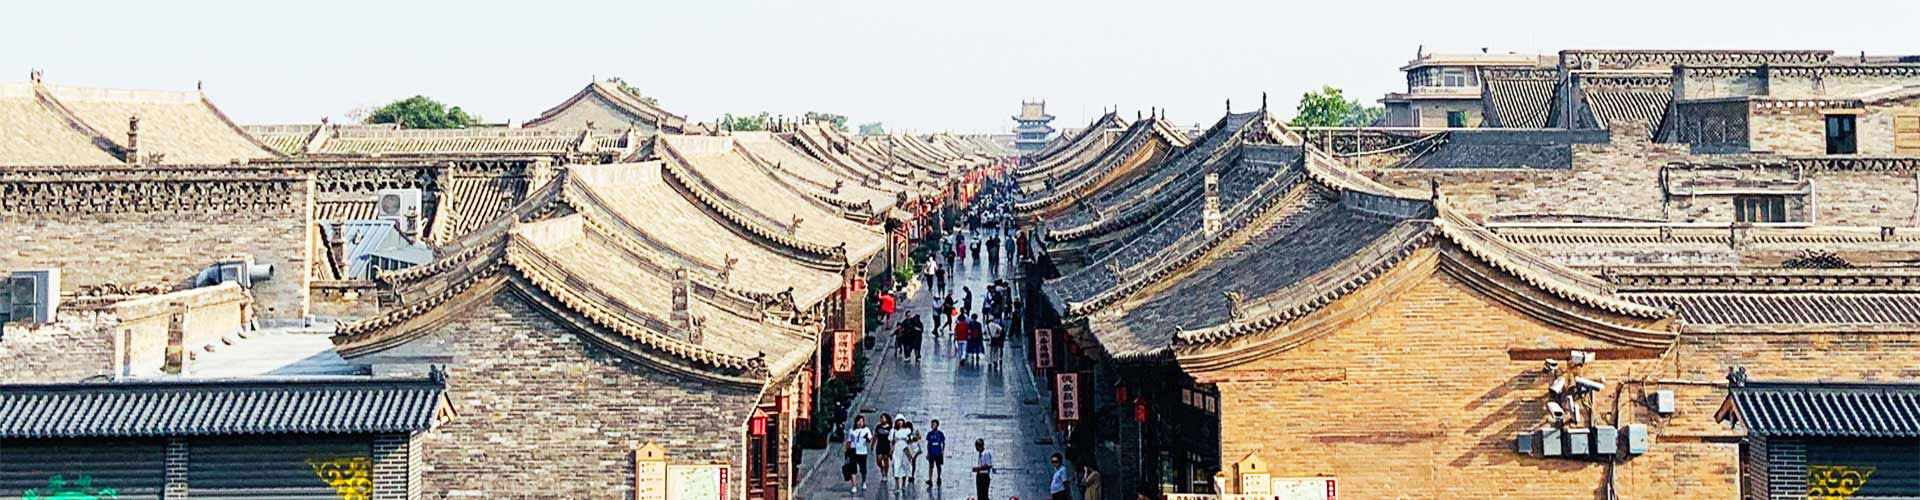 Pingyao ancient architectures